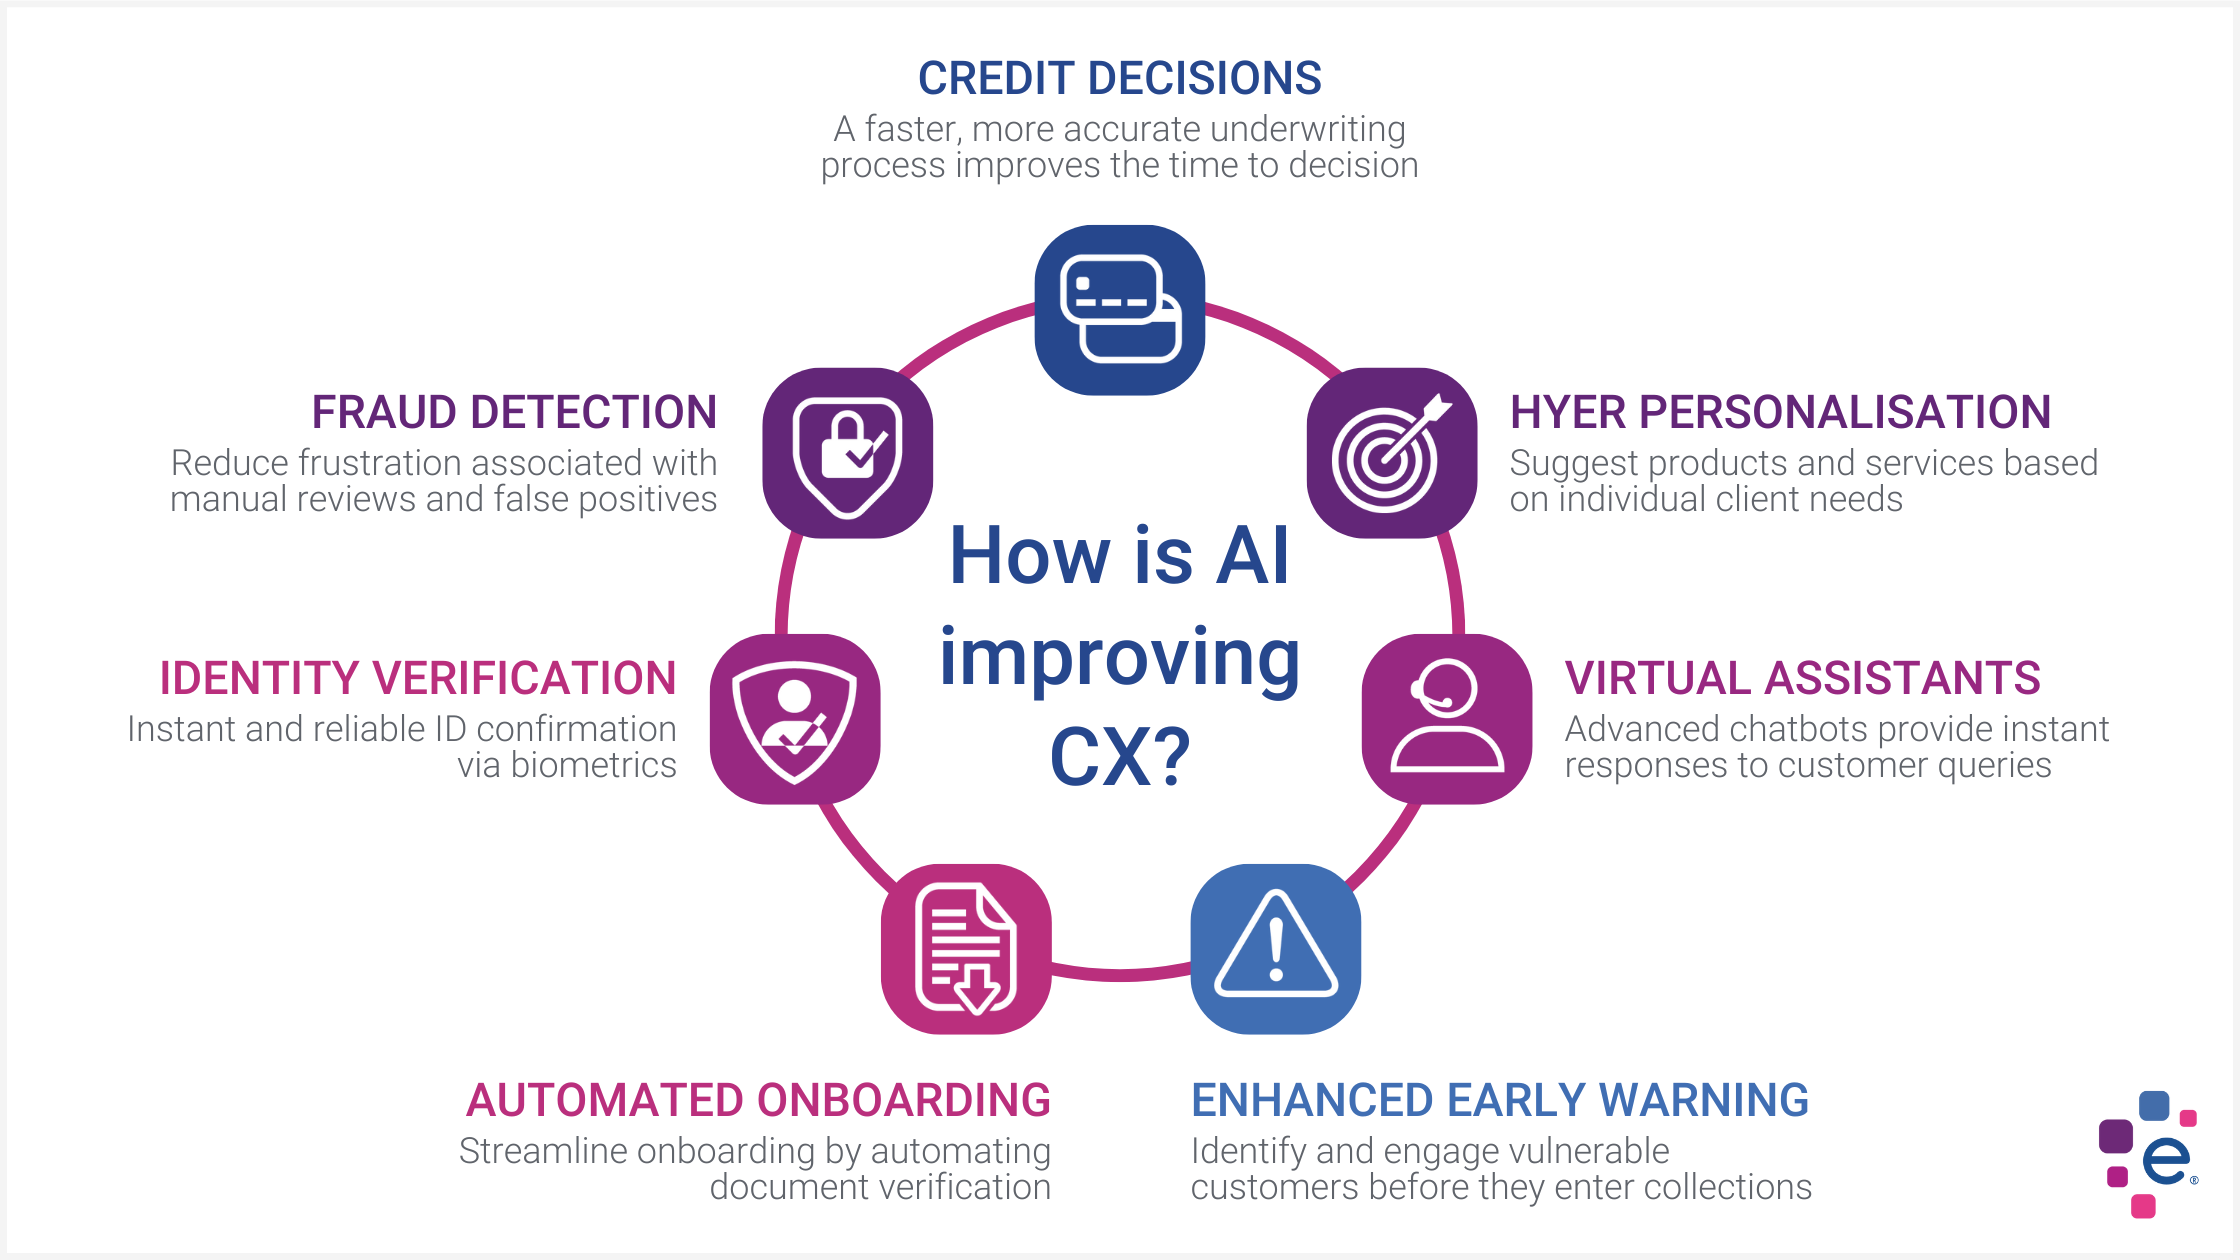 Real-world examples of AI boosting CX